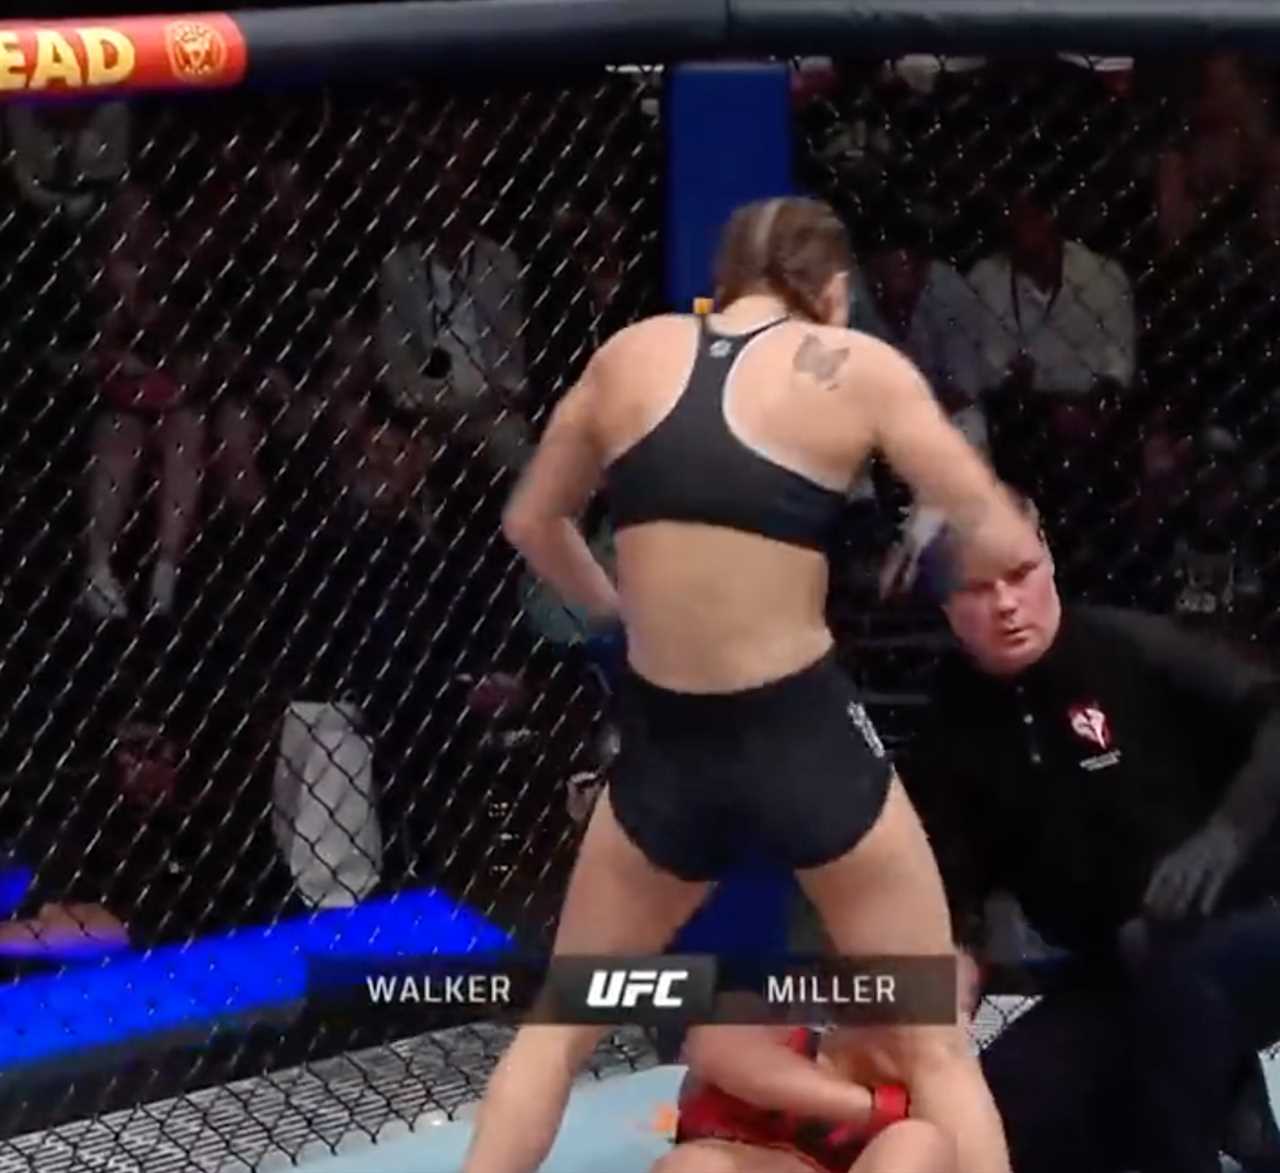 Watch UFC star Juliana Miller KO Brogan Walker, before she stands over her to perform the famous WWE celebration.